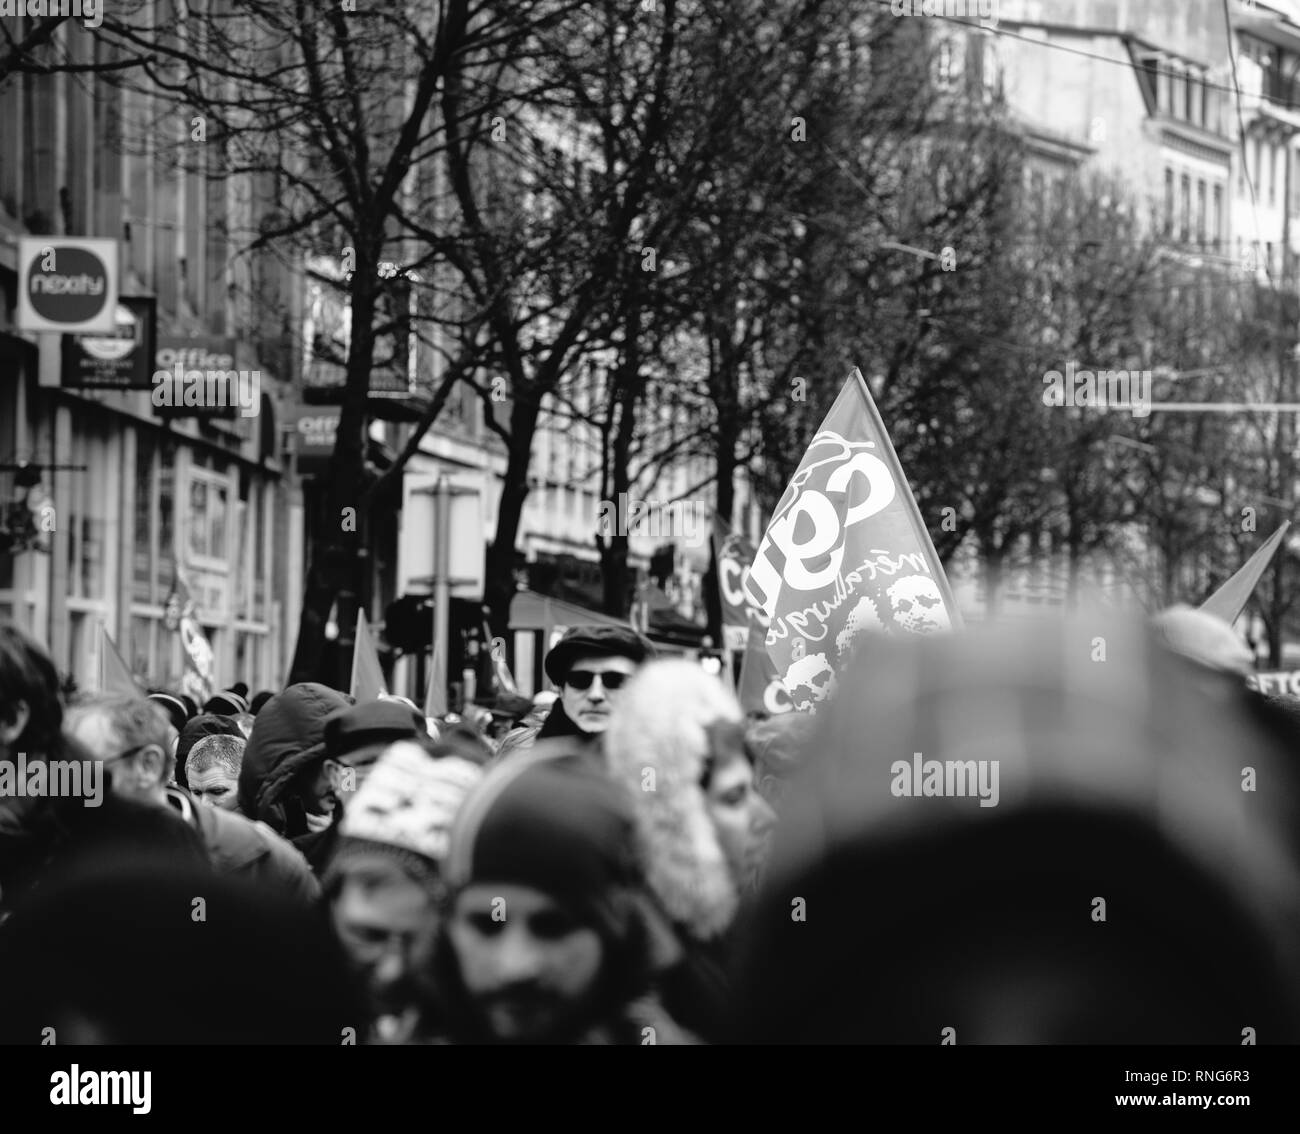 STRASBOURG, FRANCE - MAR 22, 2018: CGT General Confederation of Labour workers with placard at demonstration protest against Macron French government string of reforms - black and white image of protesters on street Stock Photo